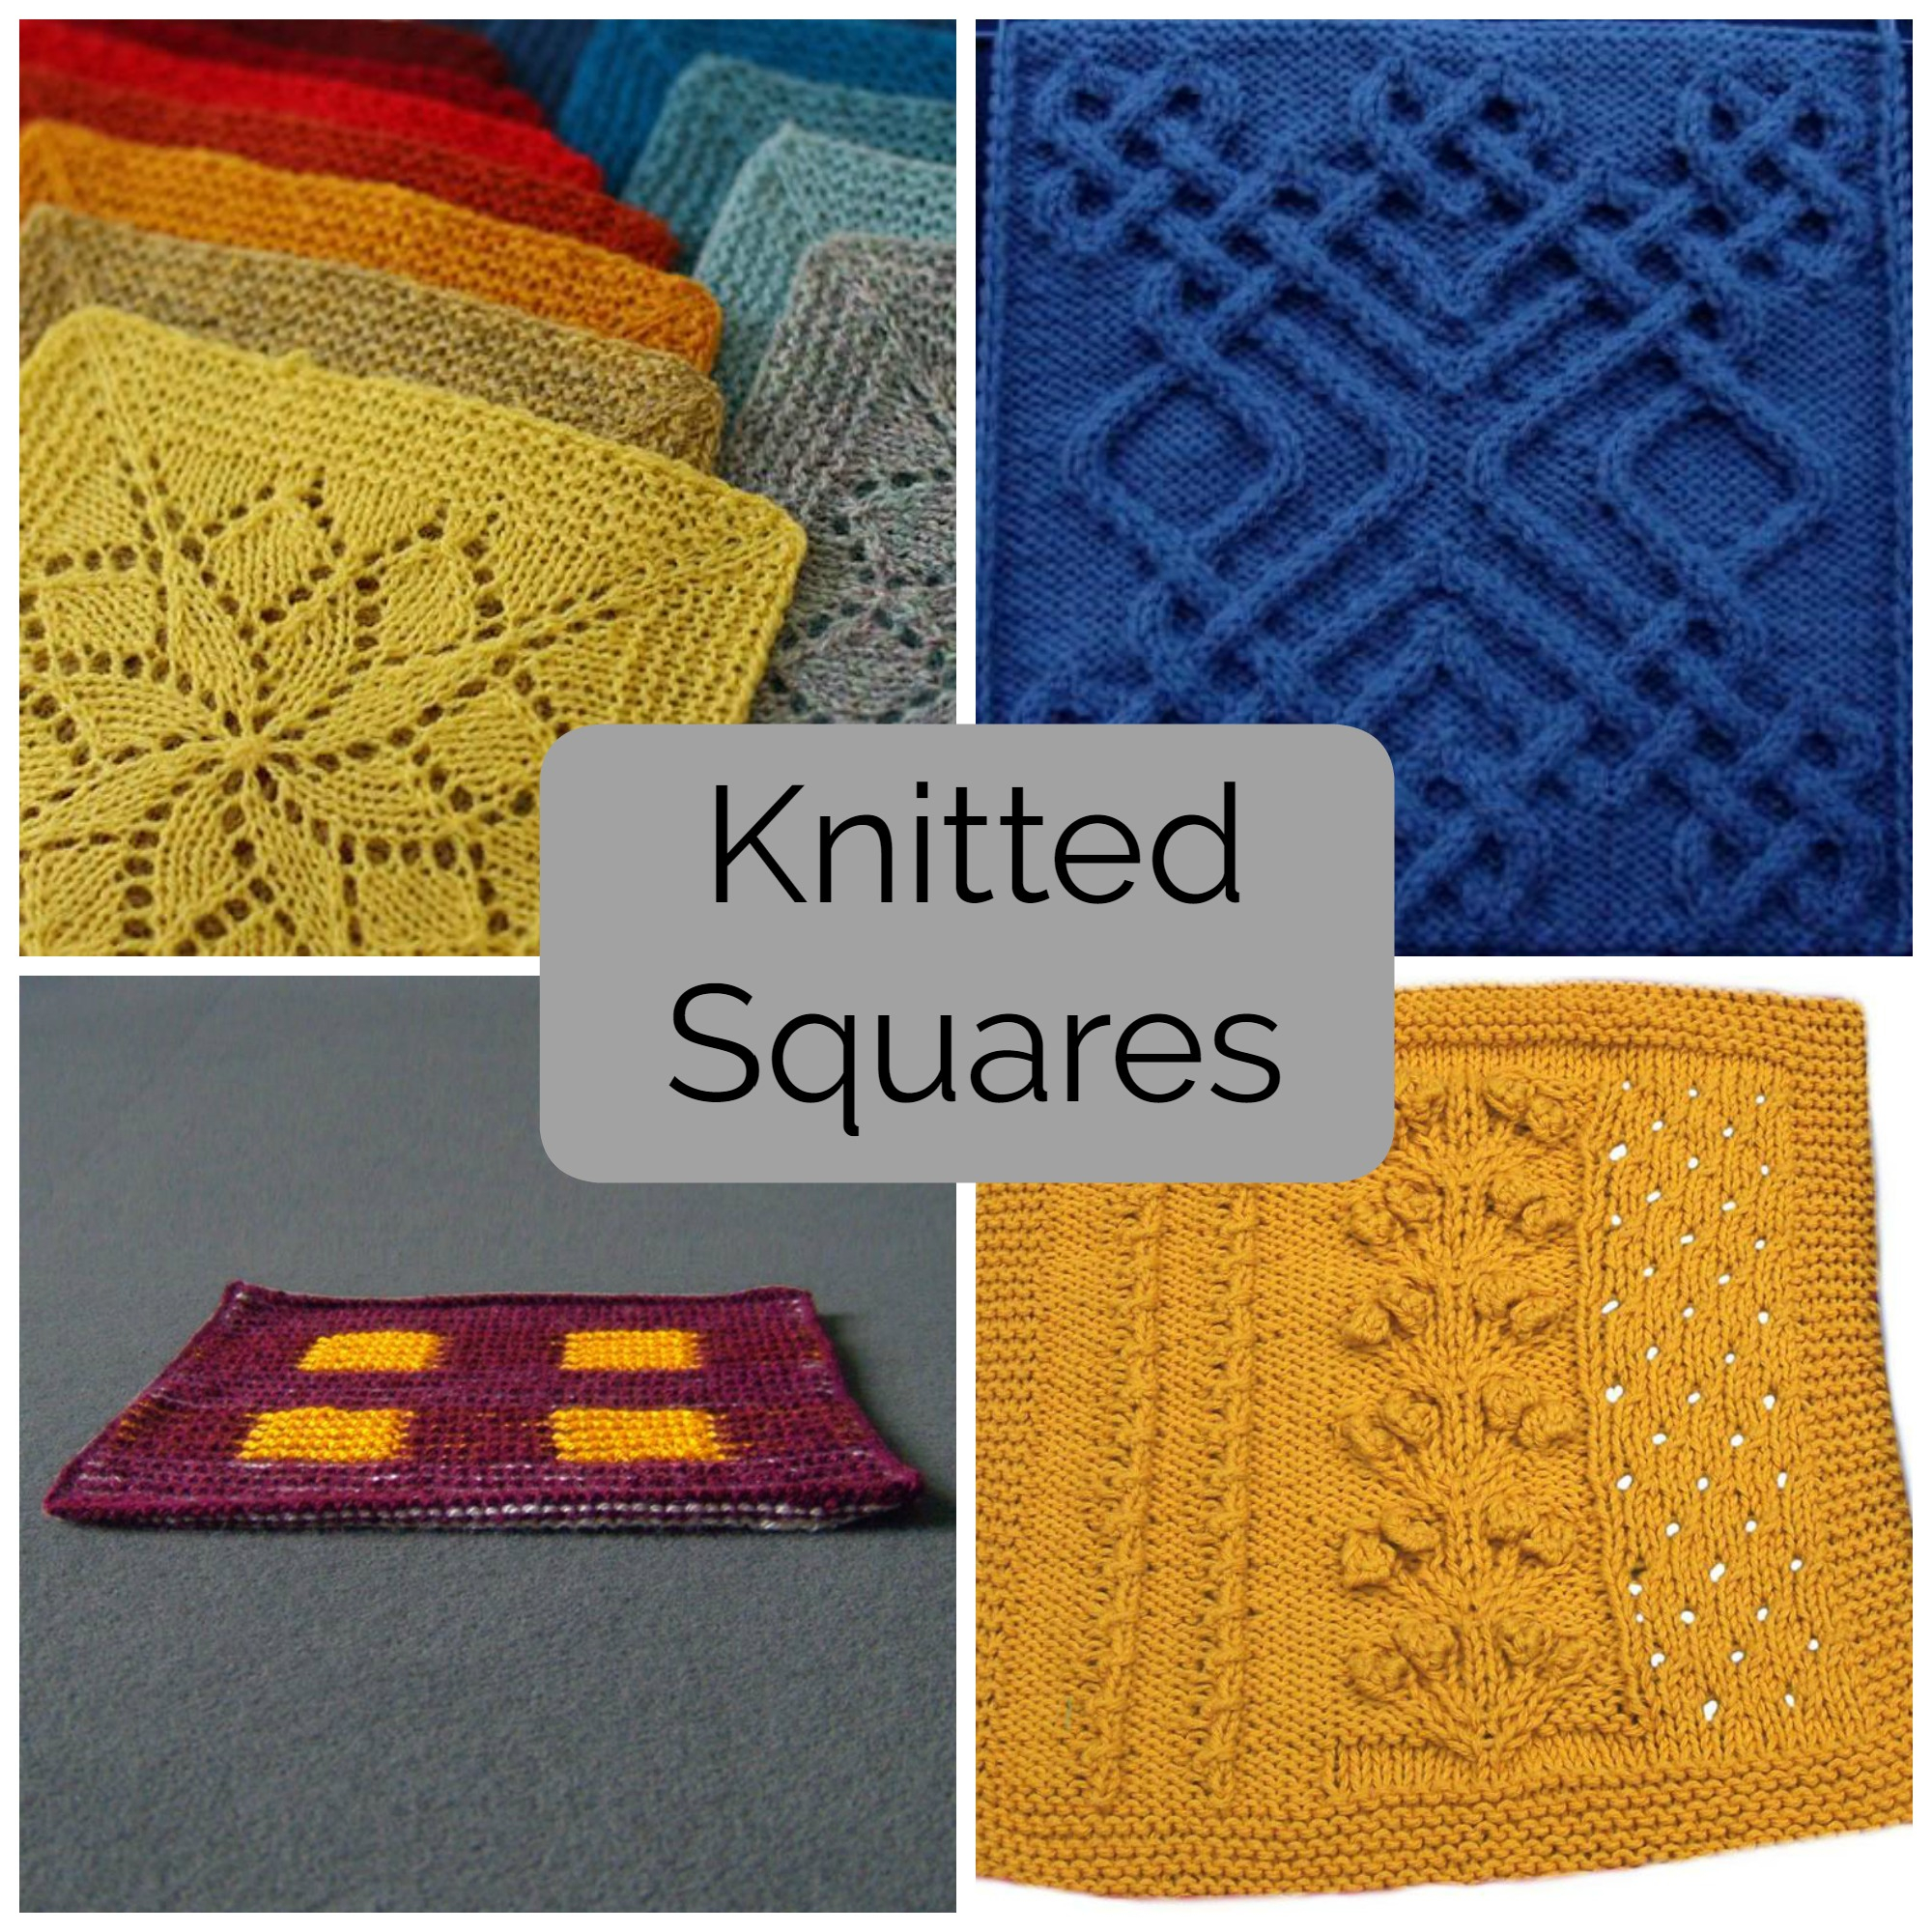 Knitted Rugs Patterns Free Mix And Match These Knitted Squares For Any Project